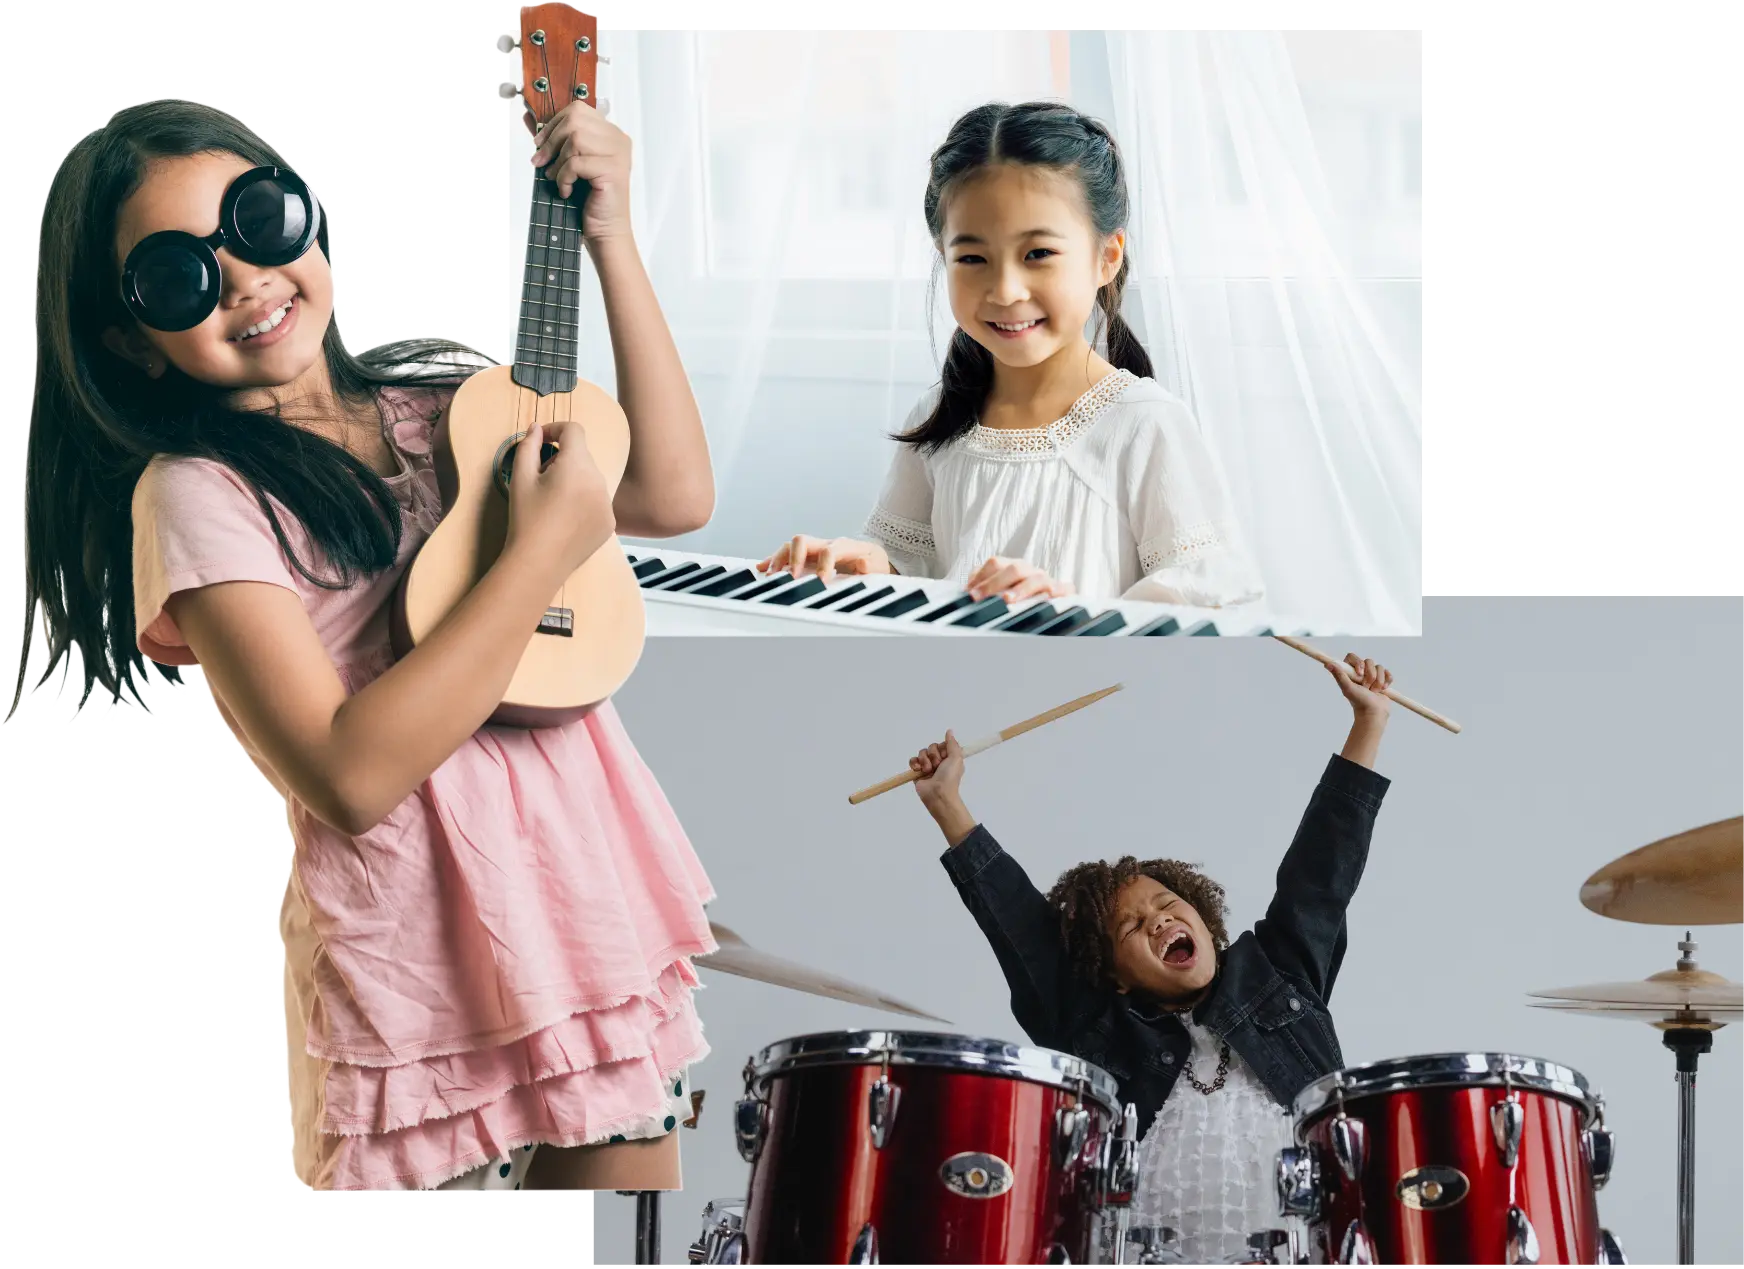 Young girls playing instruments